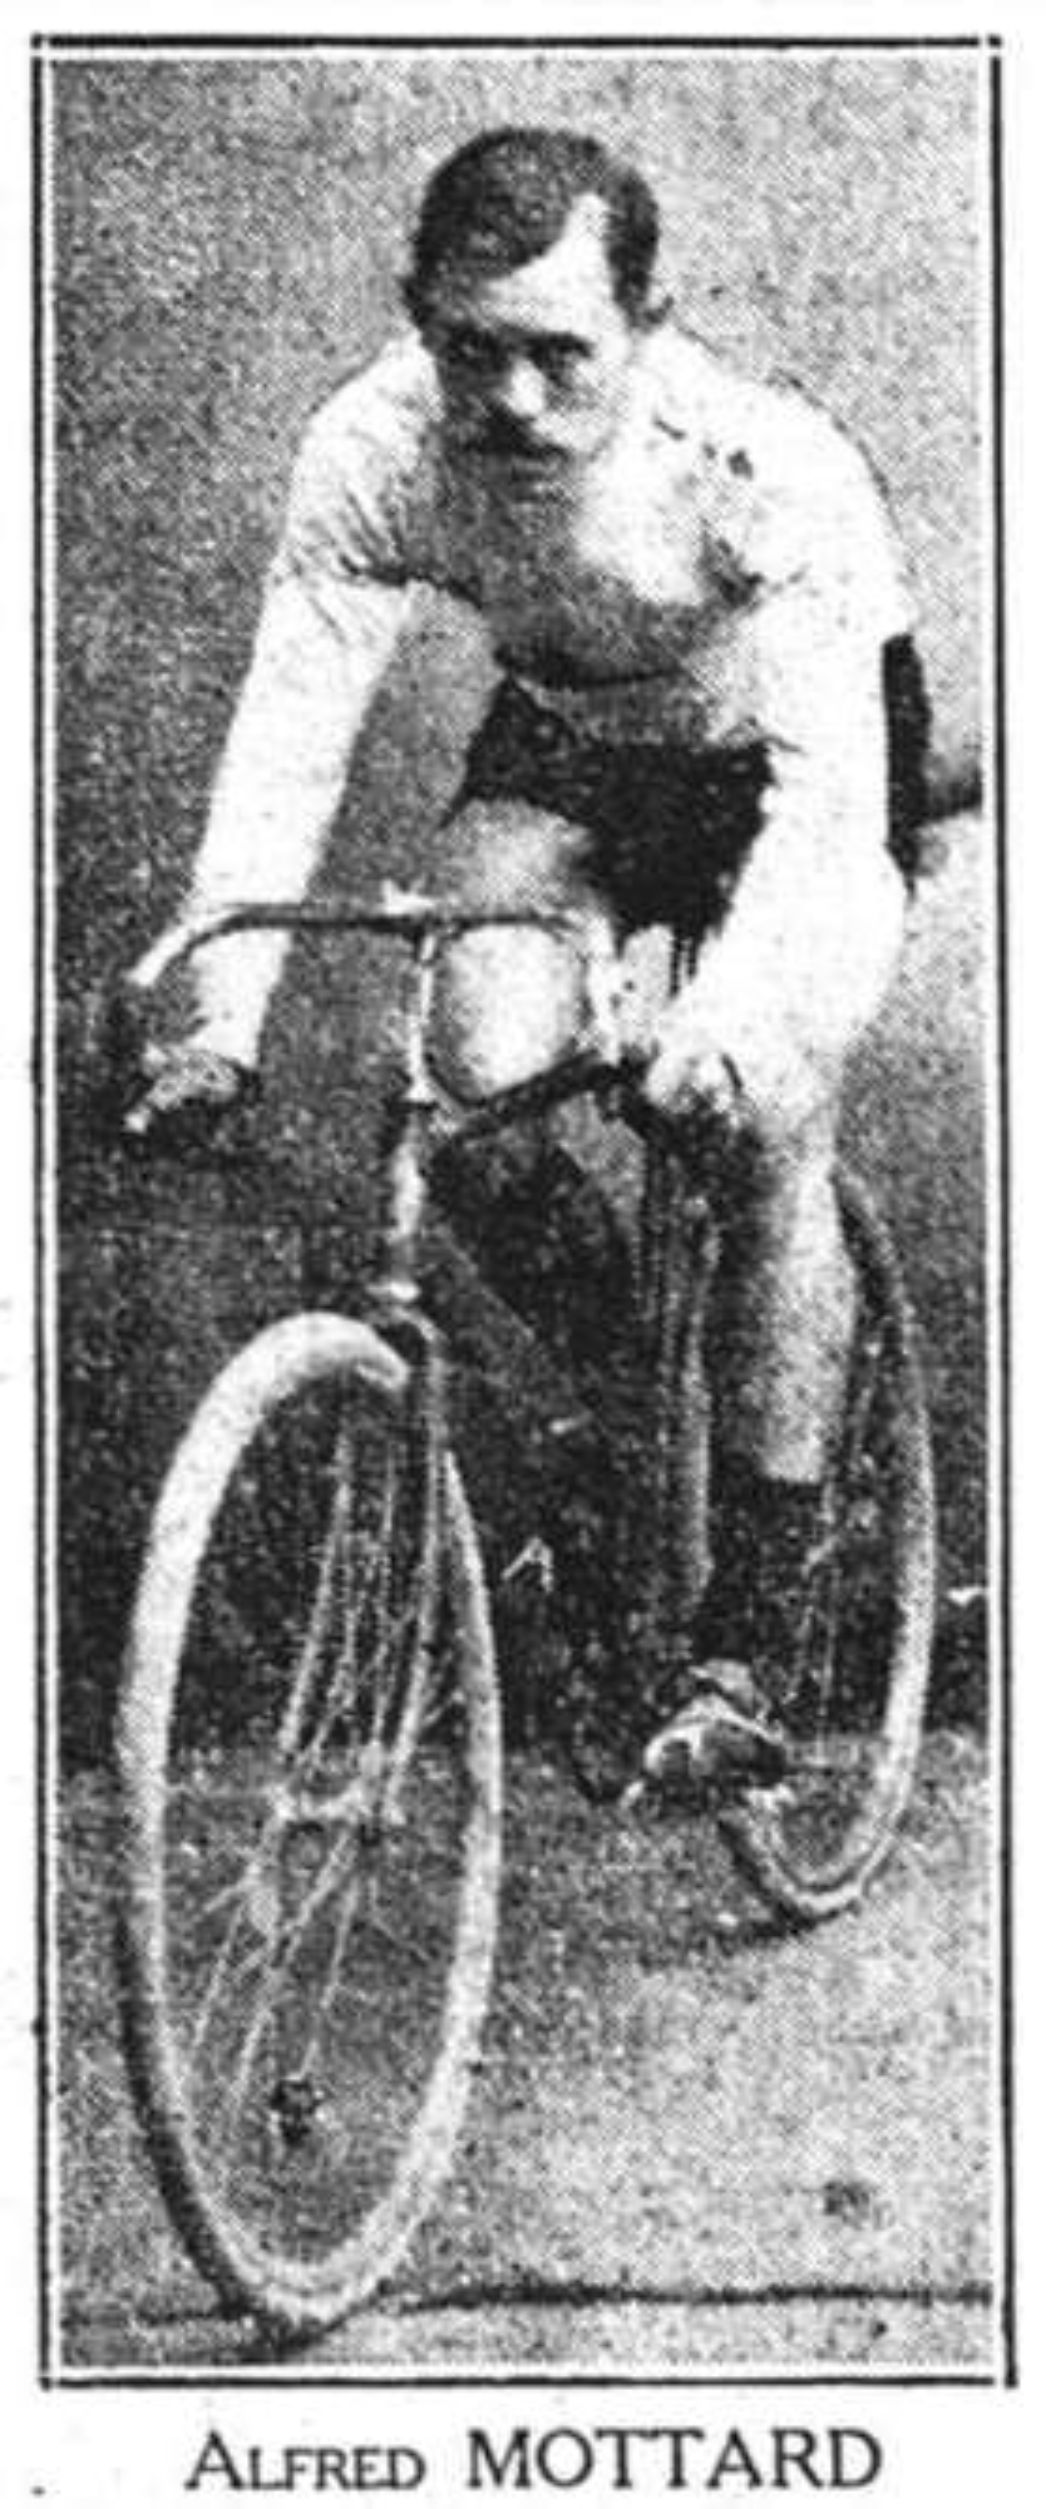 Alfred Mottard, in period cycling clothes on his bicycle. He has a characteristic large mustache.